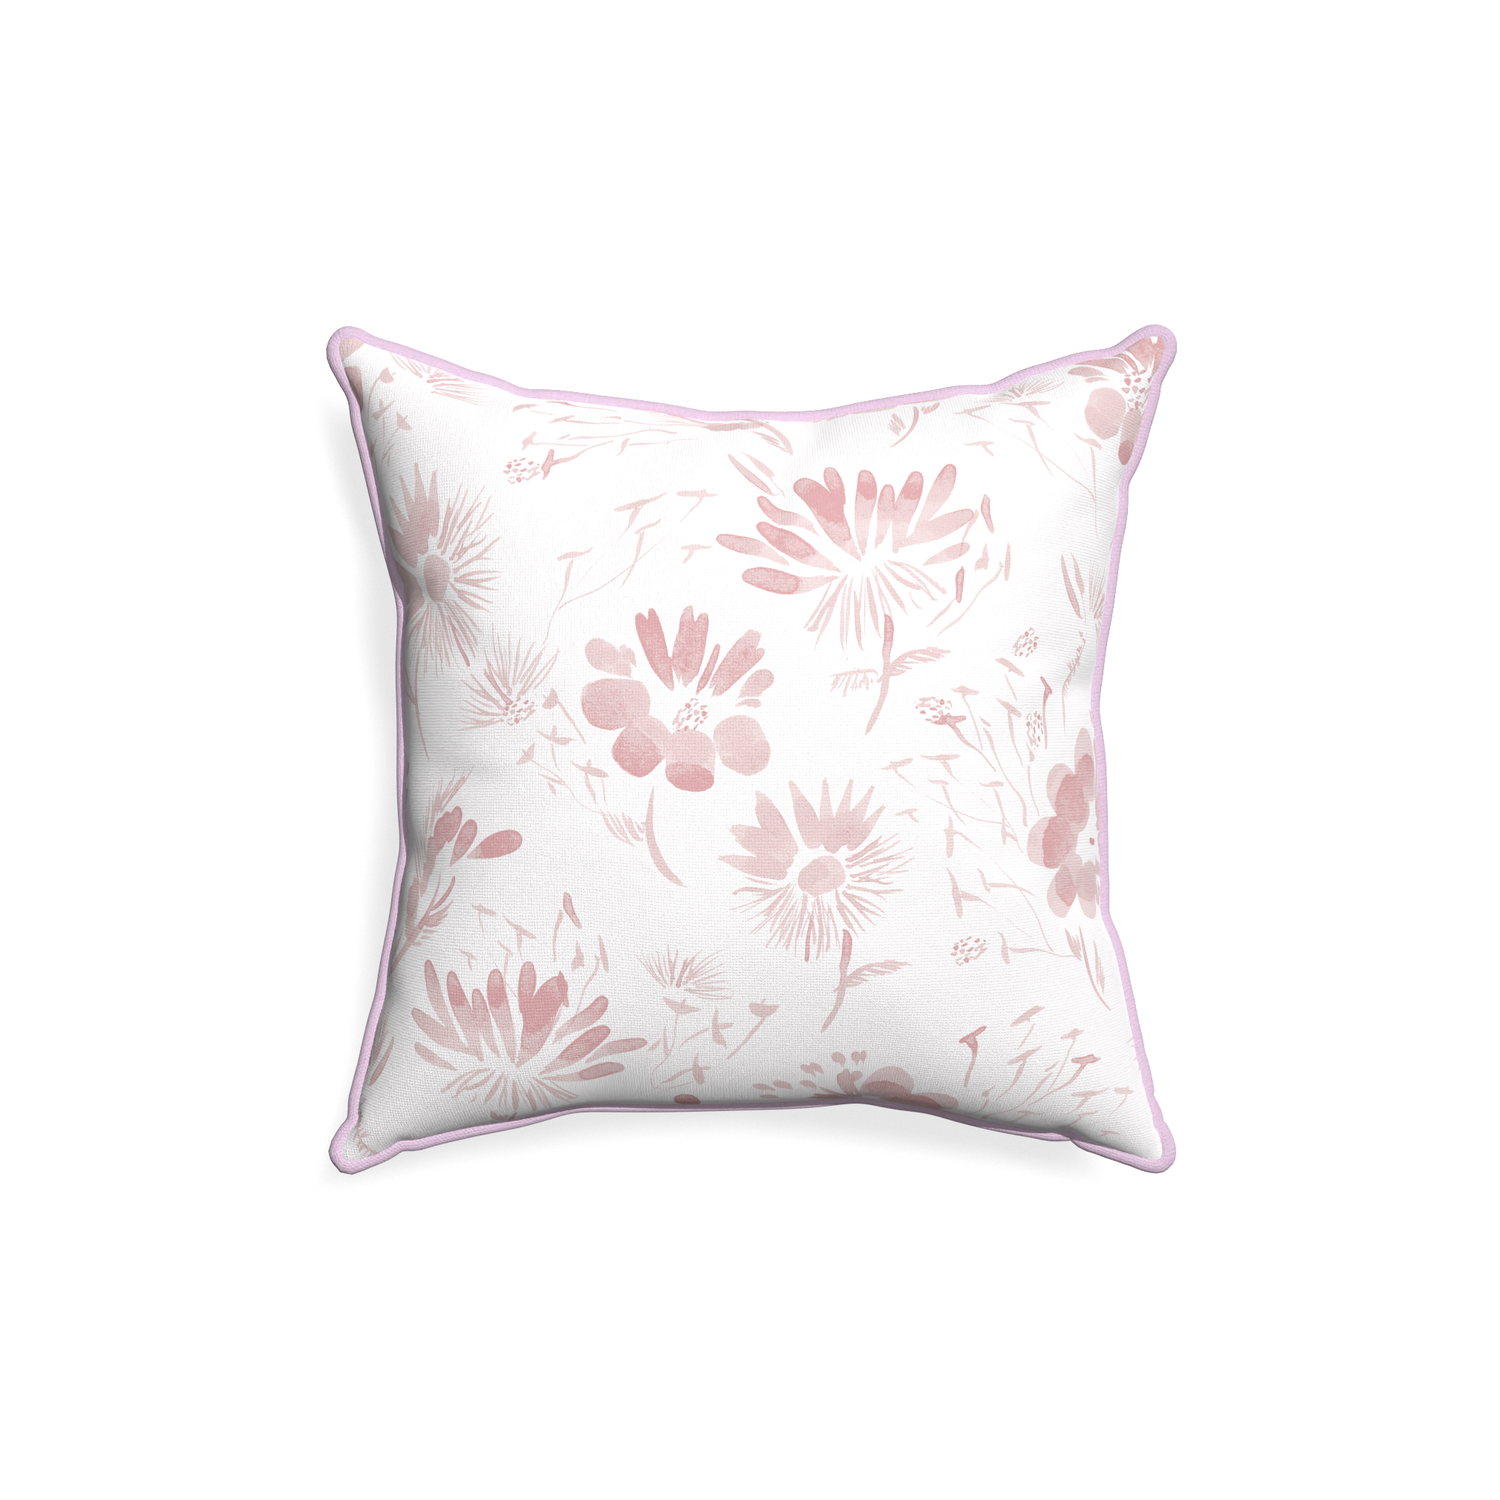 18-square blake custom pink floralpillow with l piping on white background